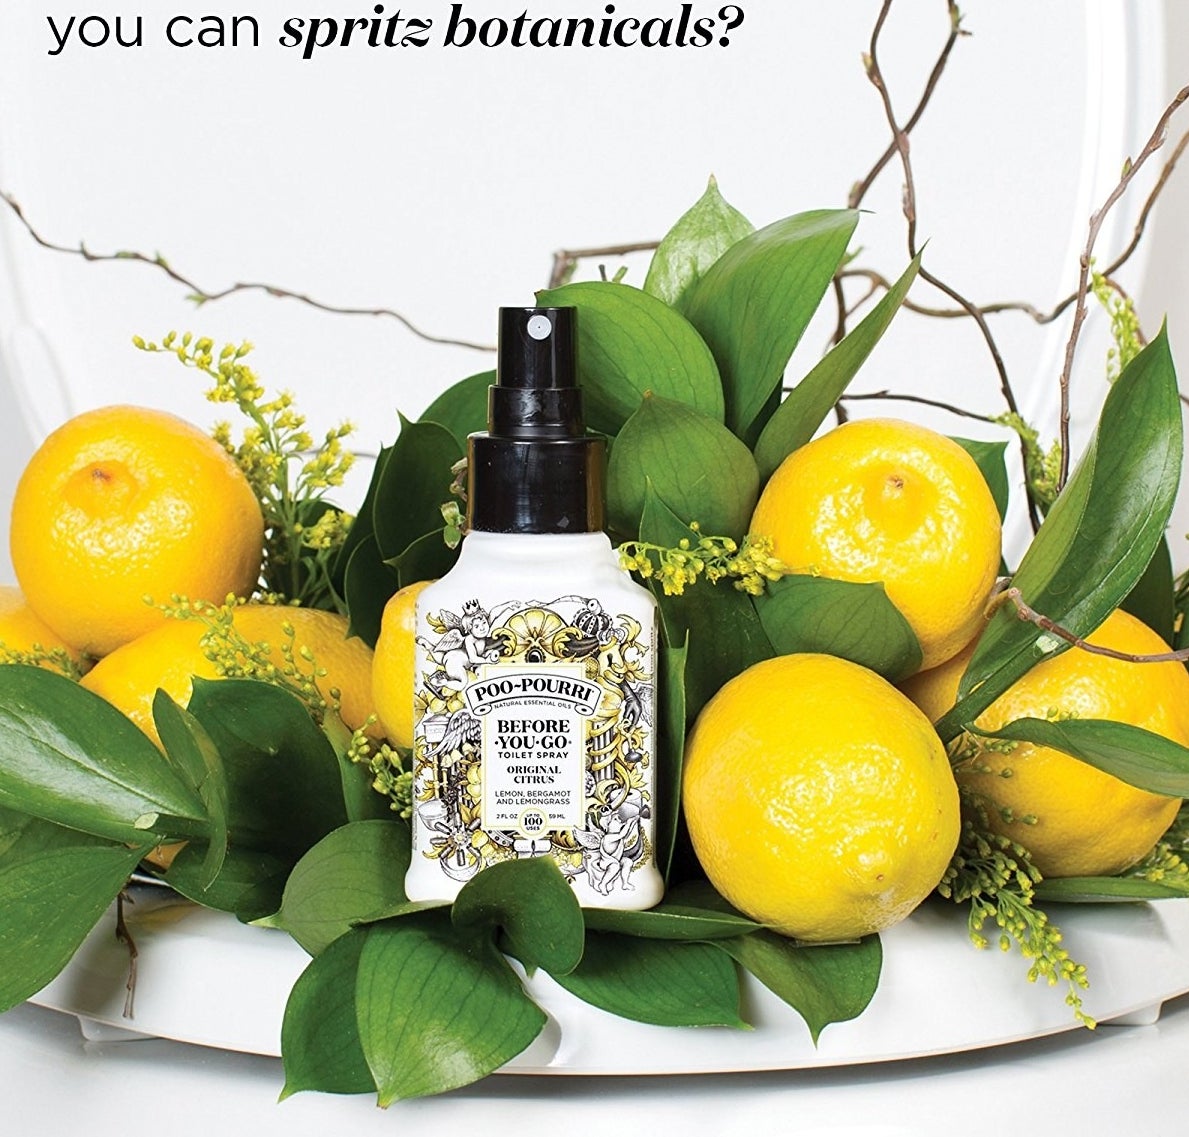 the bottle of poo-pourri displayed next to some lemons